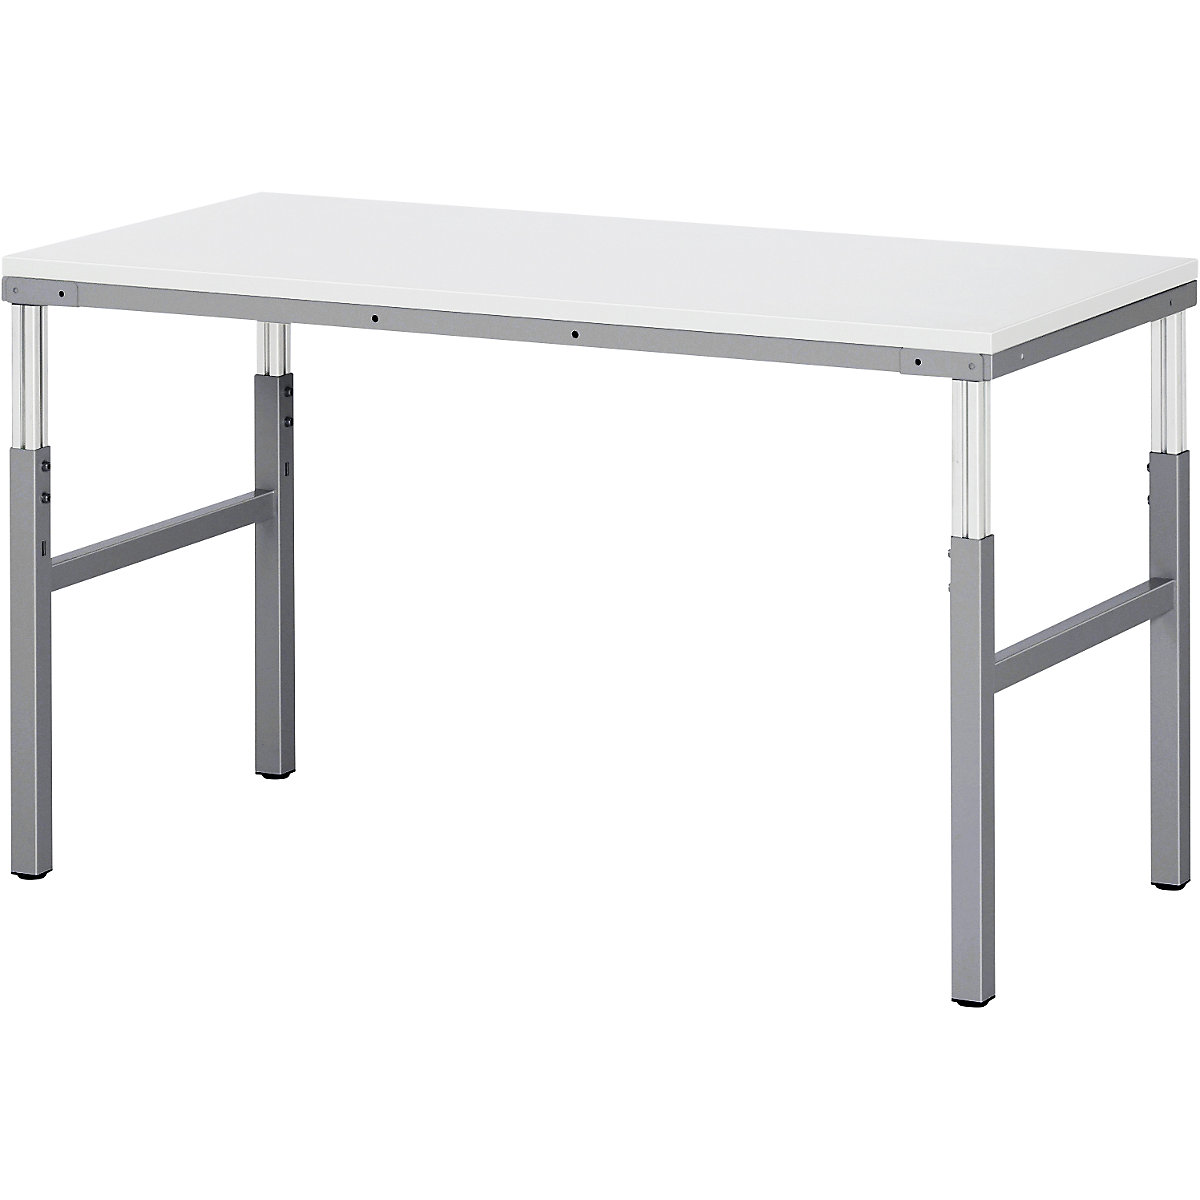 Workstation system, manual height adjustable from 650 – 1000 mm – RAU, standard table, WxD 1500 x 700 mm-4